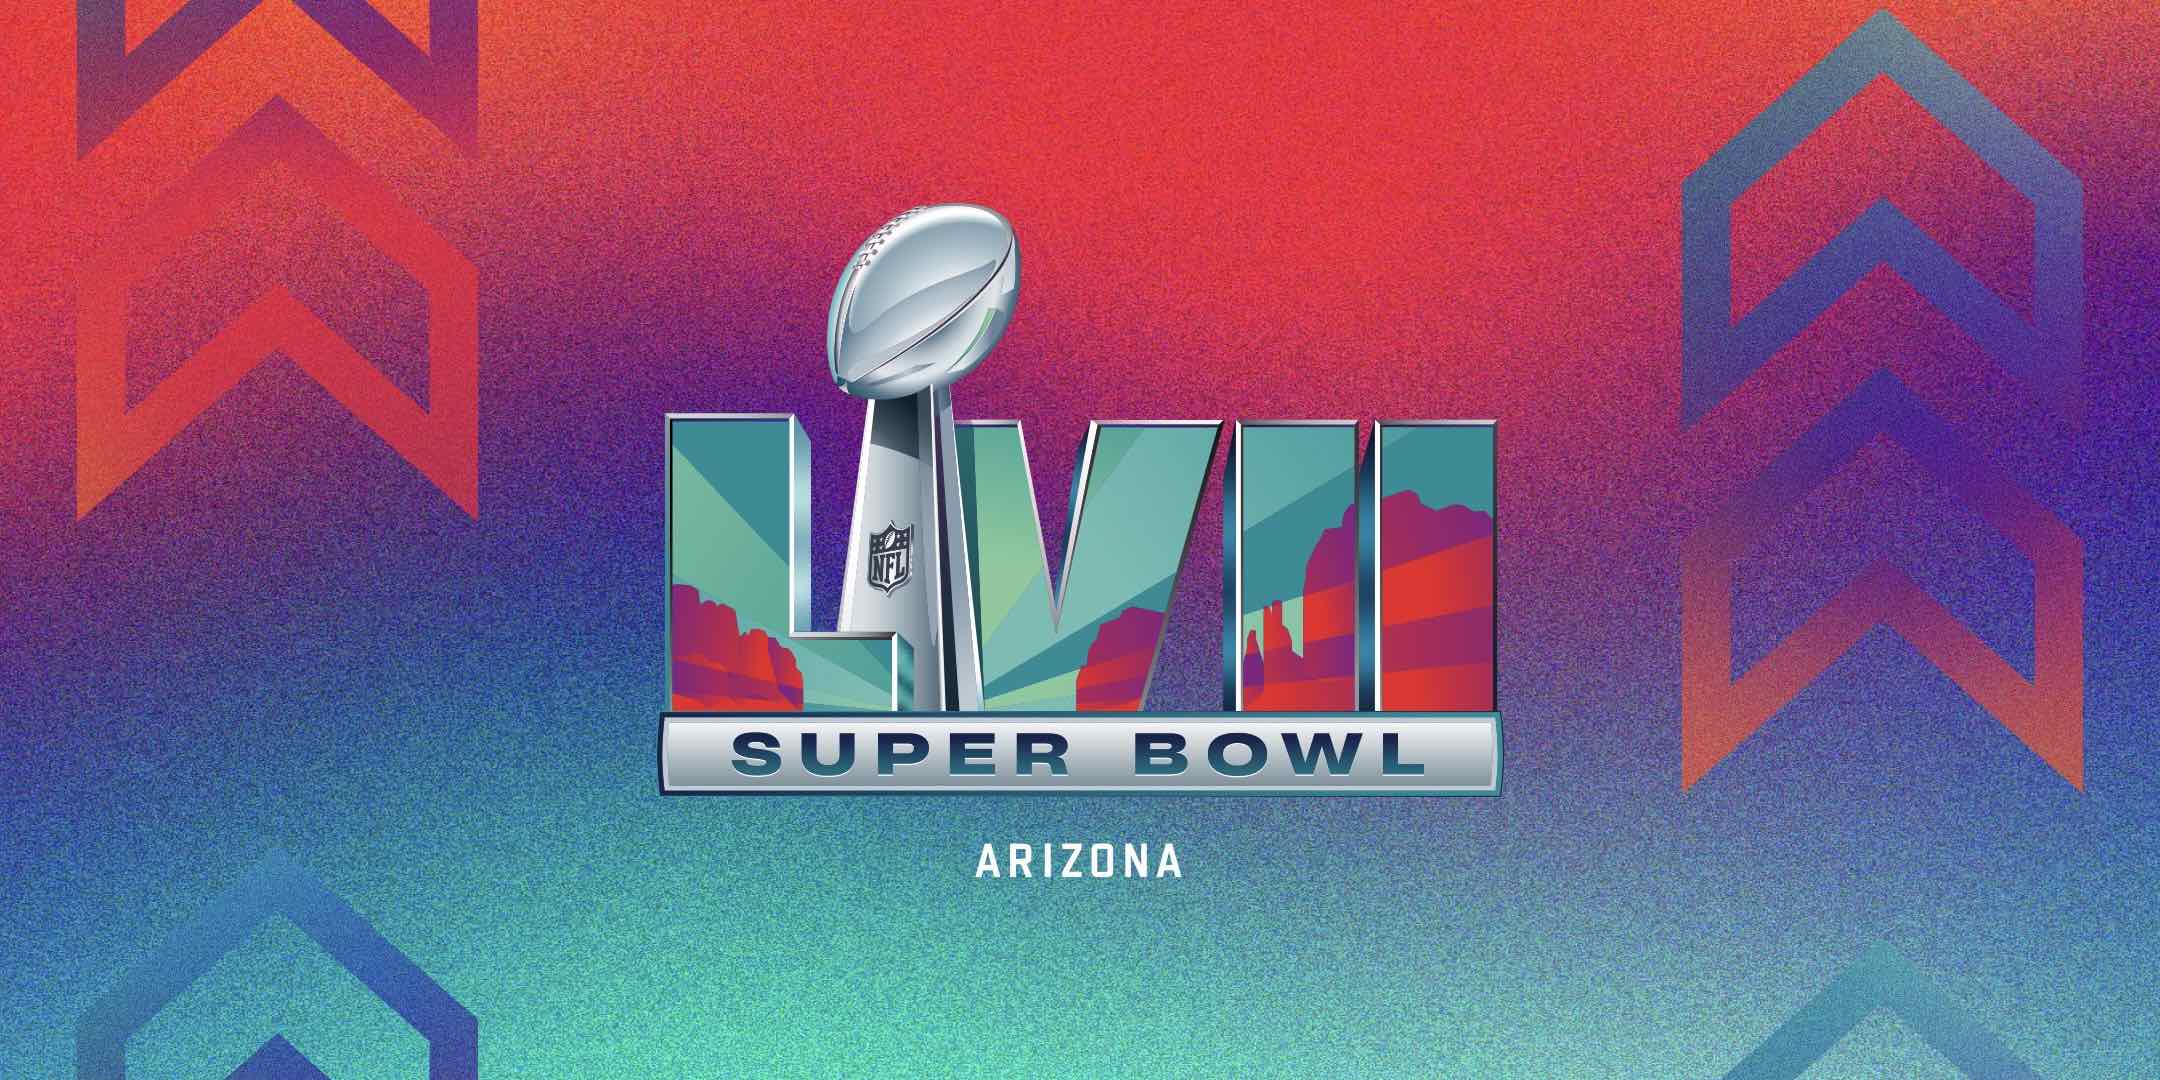 How to watch the Super Bowl free